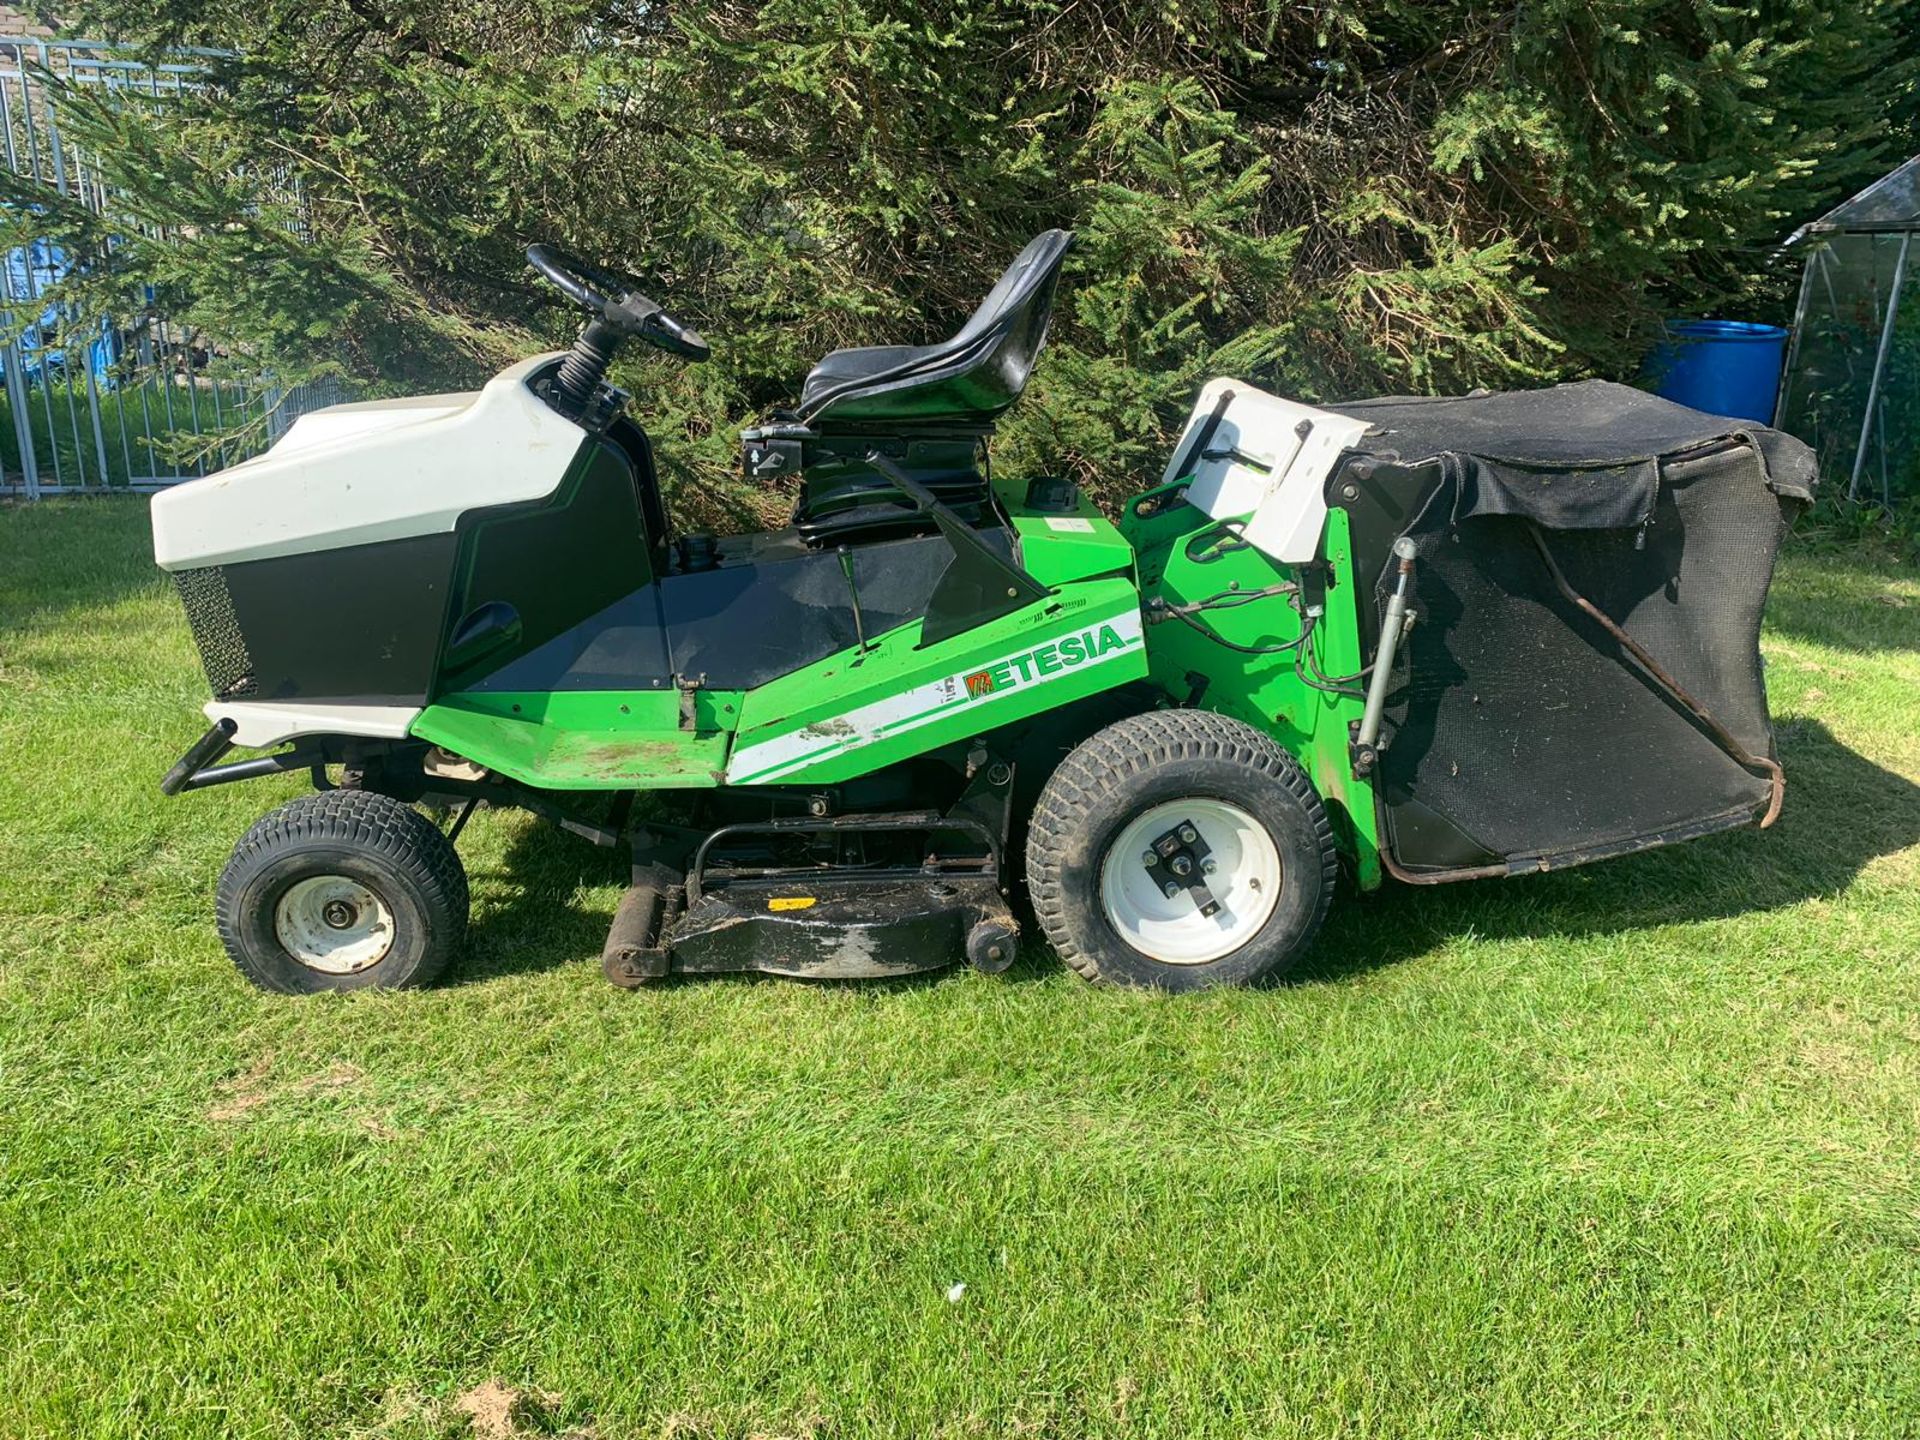 ETESIA MVEHH HYDRO RIDE ON LAWN MOWER C/W REAR GRASS COLLECTOR, RUNS, WORKS AND CUTS *PLUS VAT* - Image 5 of 16